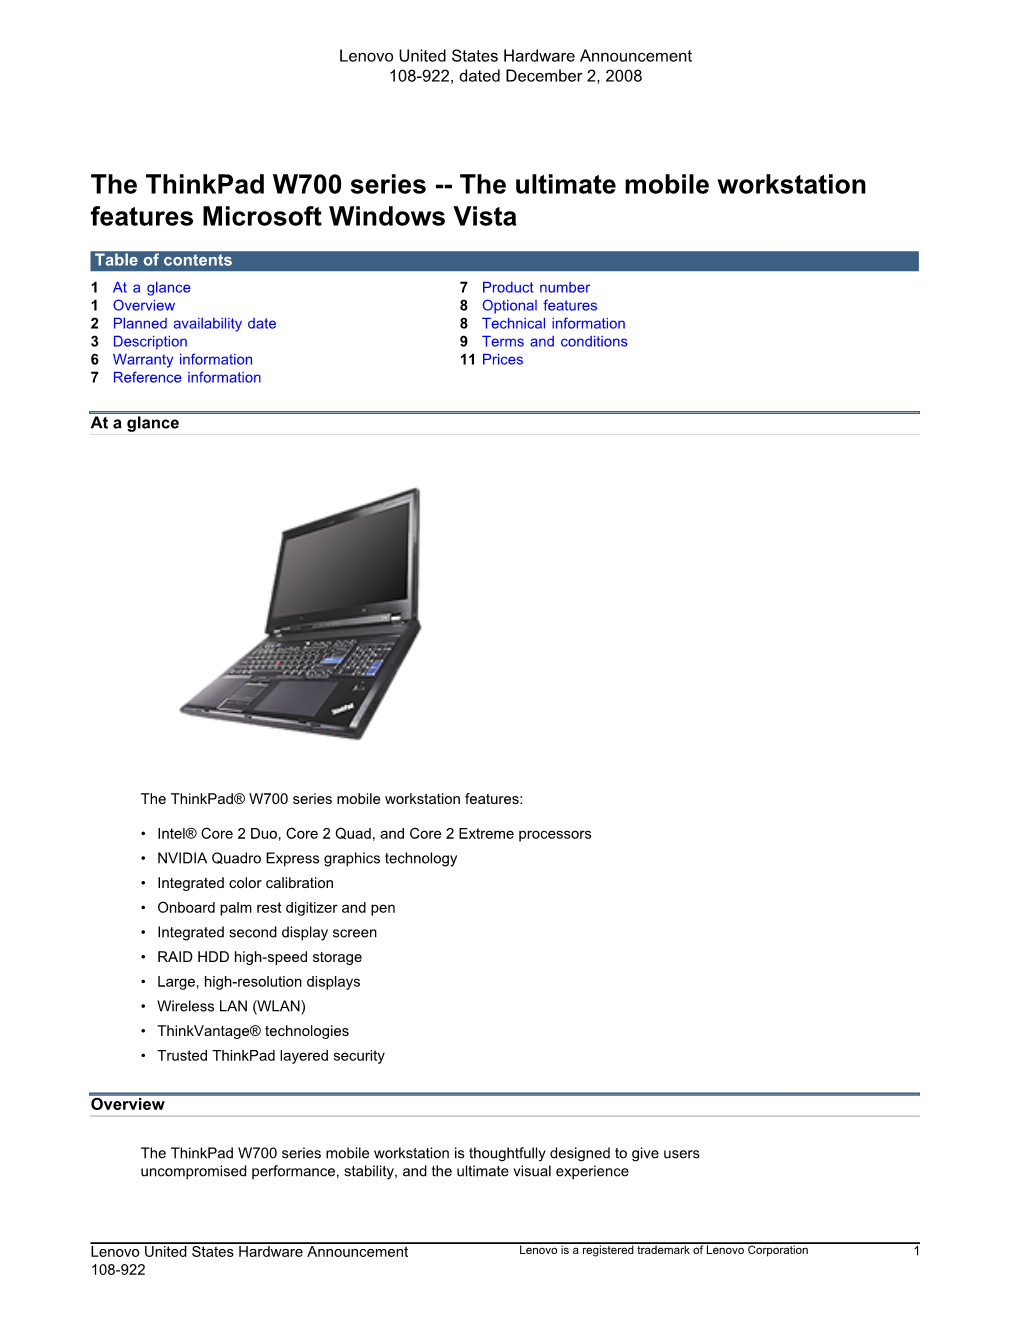 The Thinkpad W700 Series -- the Ultimate Mobile Workstation Features Microsoft Windows Vista